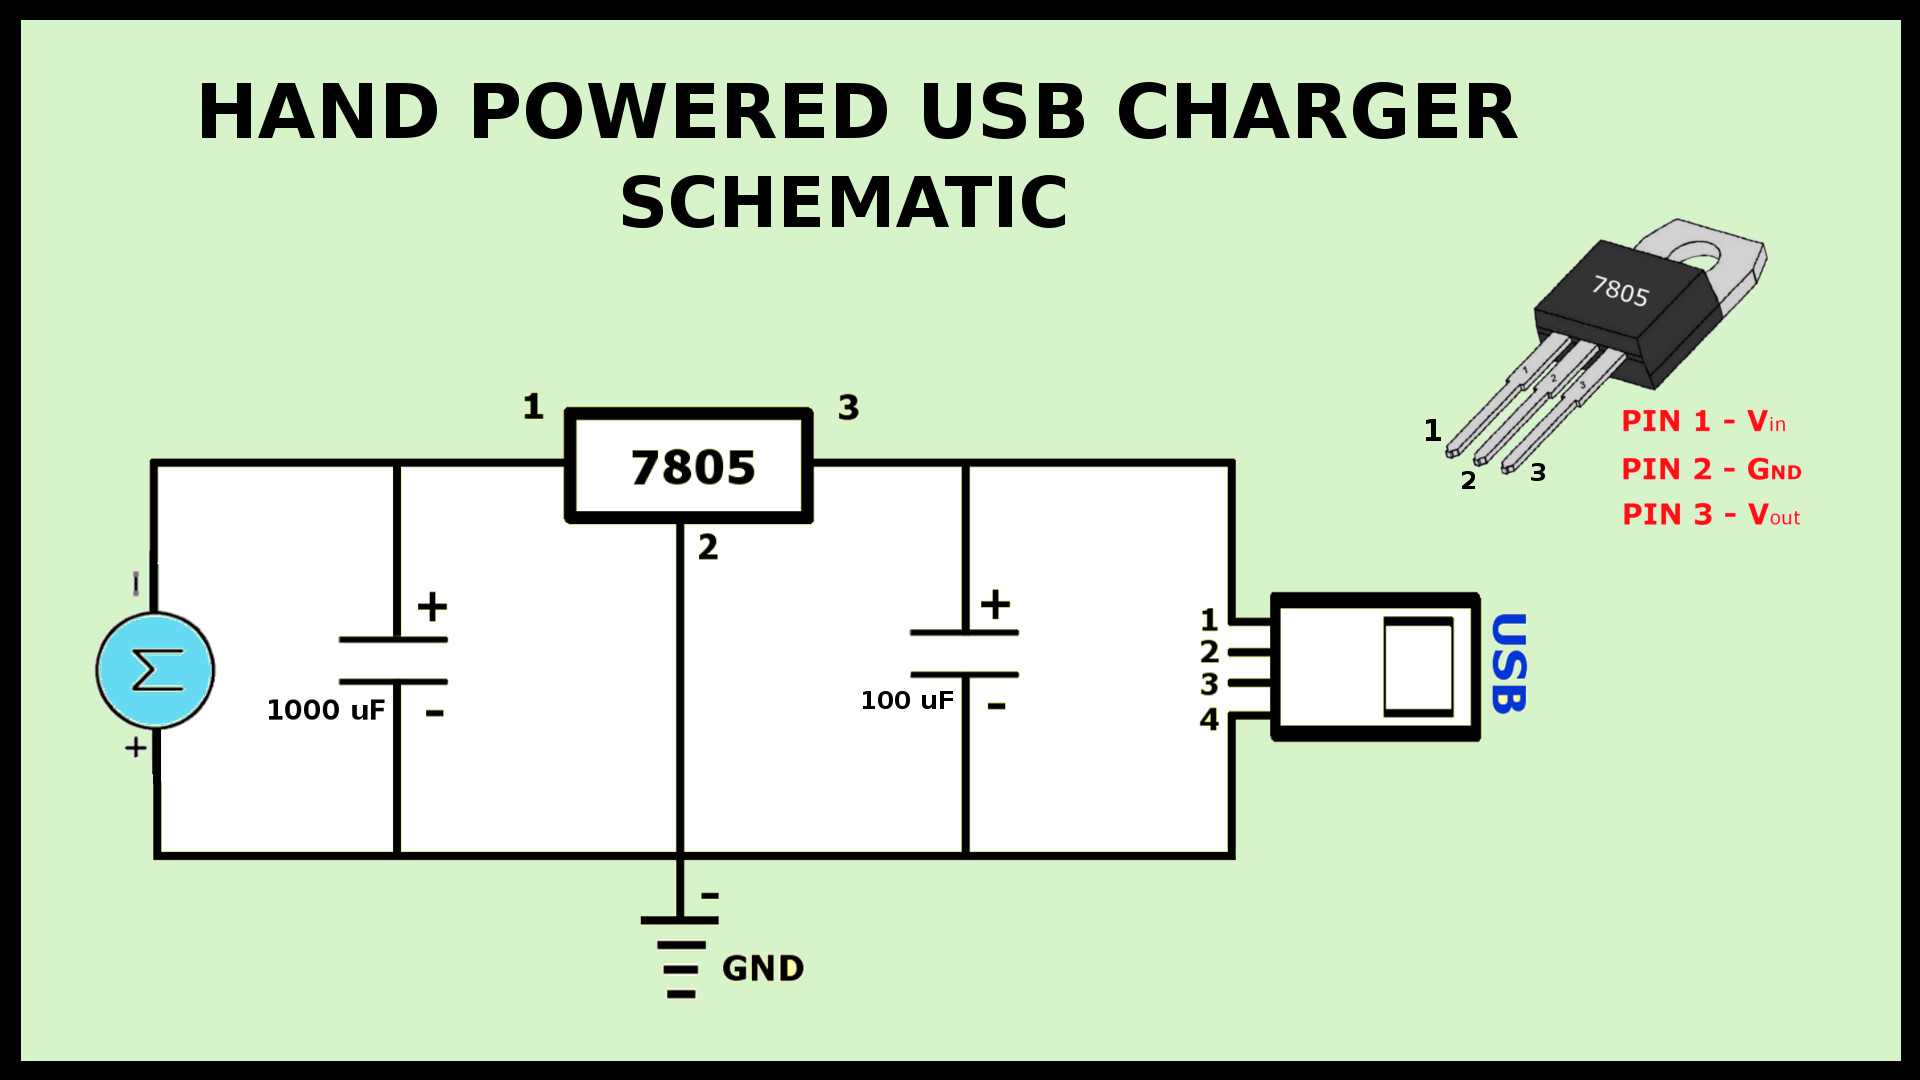 Hand Powered USB Charger Schematic.jpg